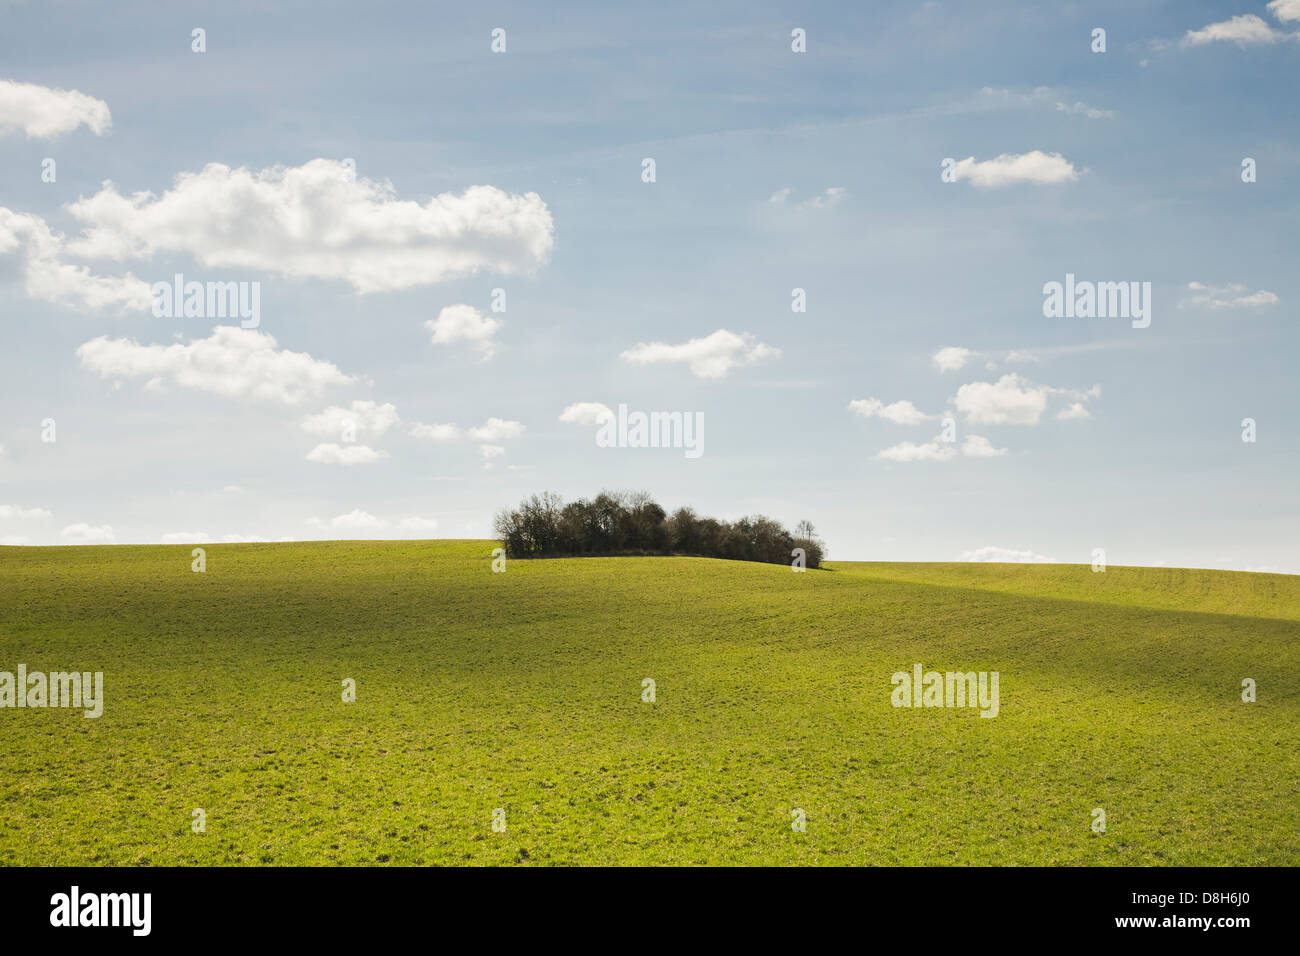 Small group of trees in a field Stock Photo